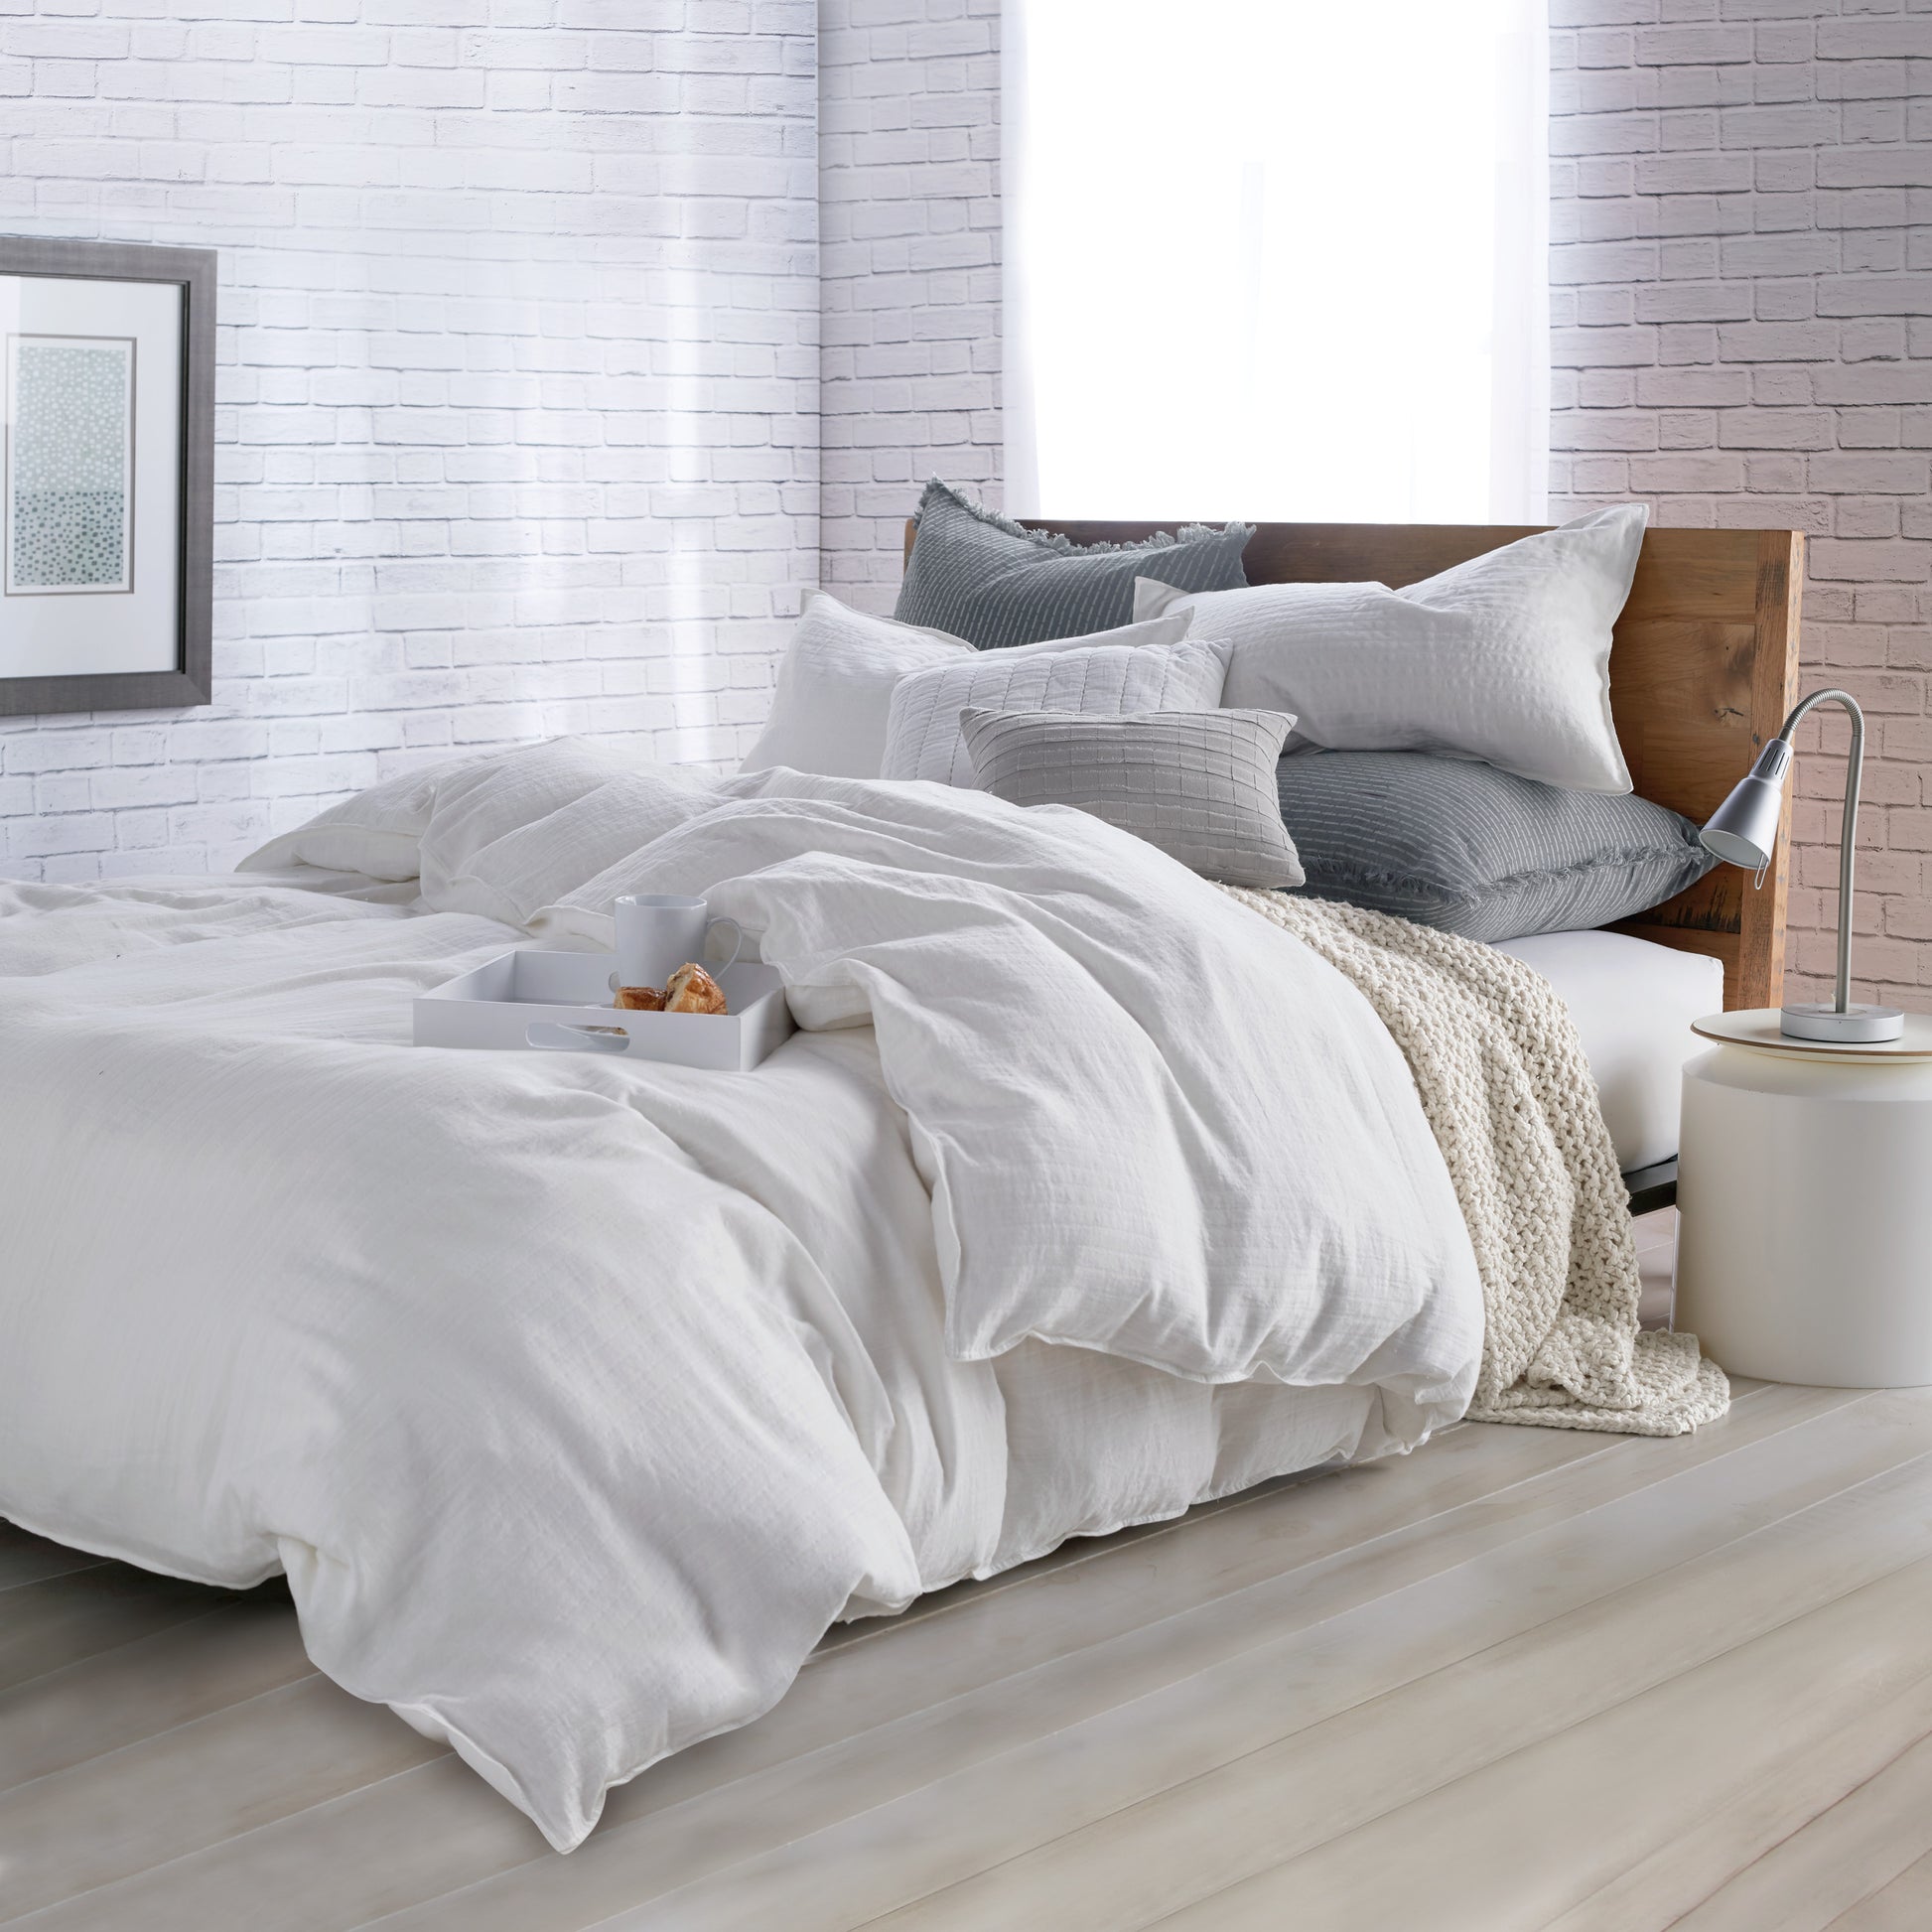 DKNY PURE Comfy Bedding Duvet Collection White